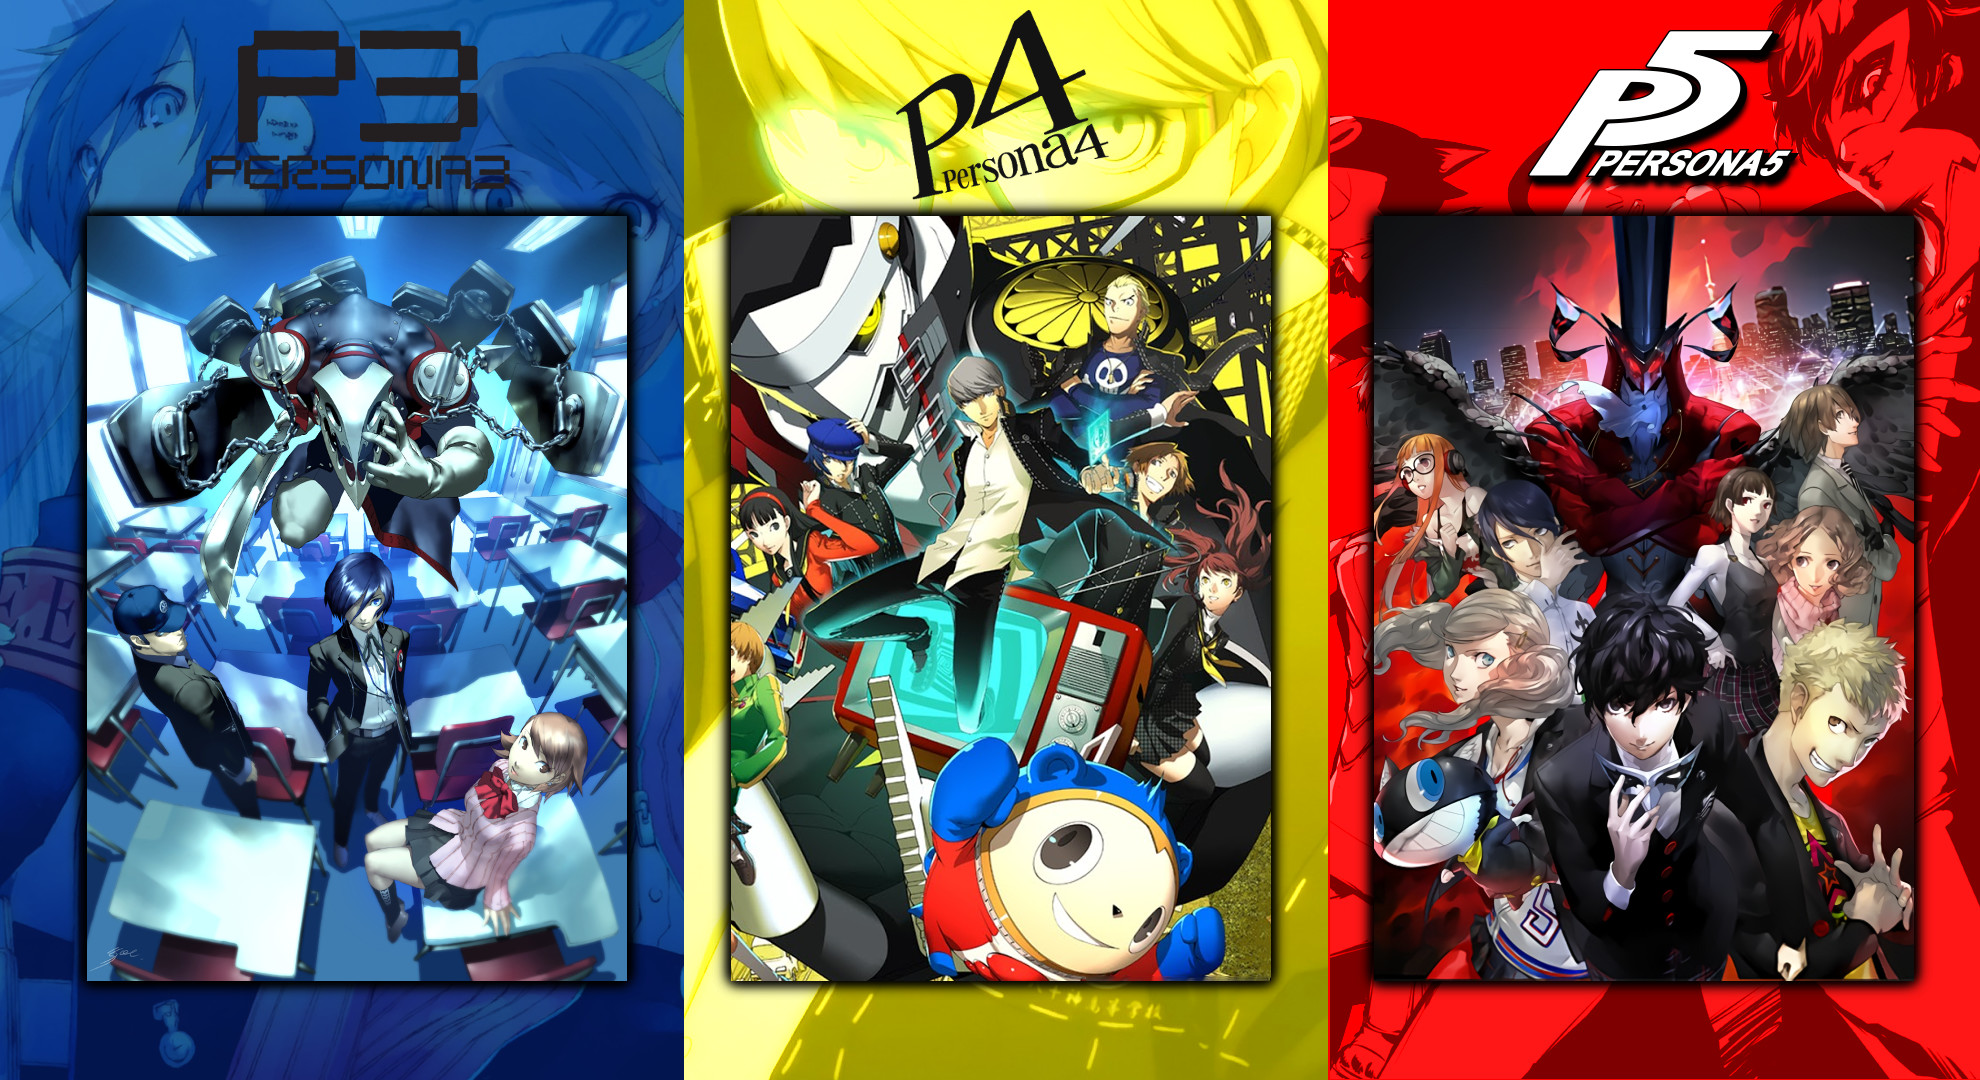 I Made A Persona Wallpaper For You Guys - Persona 5 All Personas - HD Wallpaper 